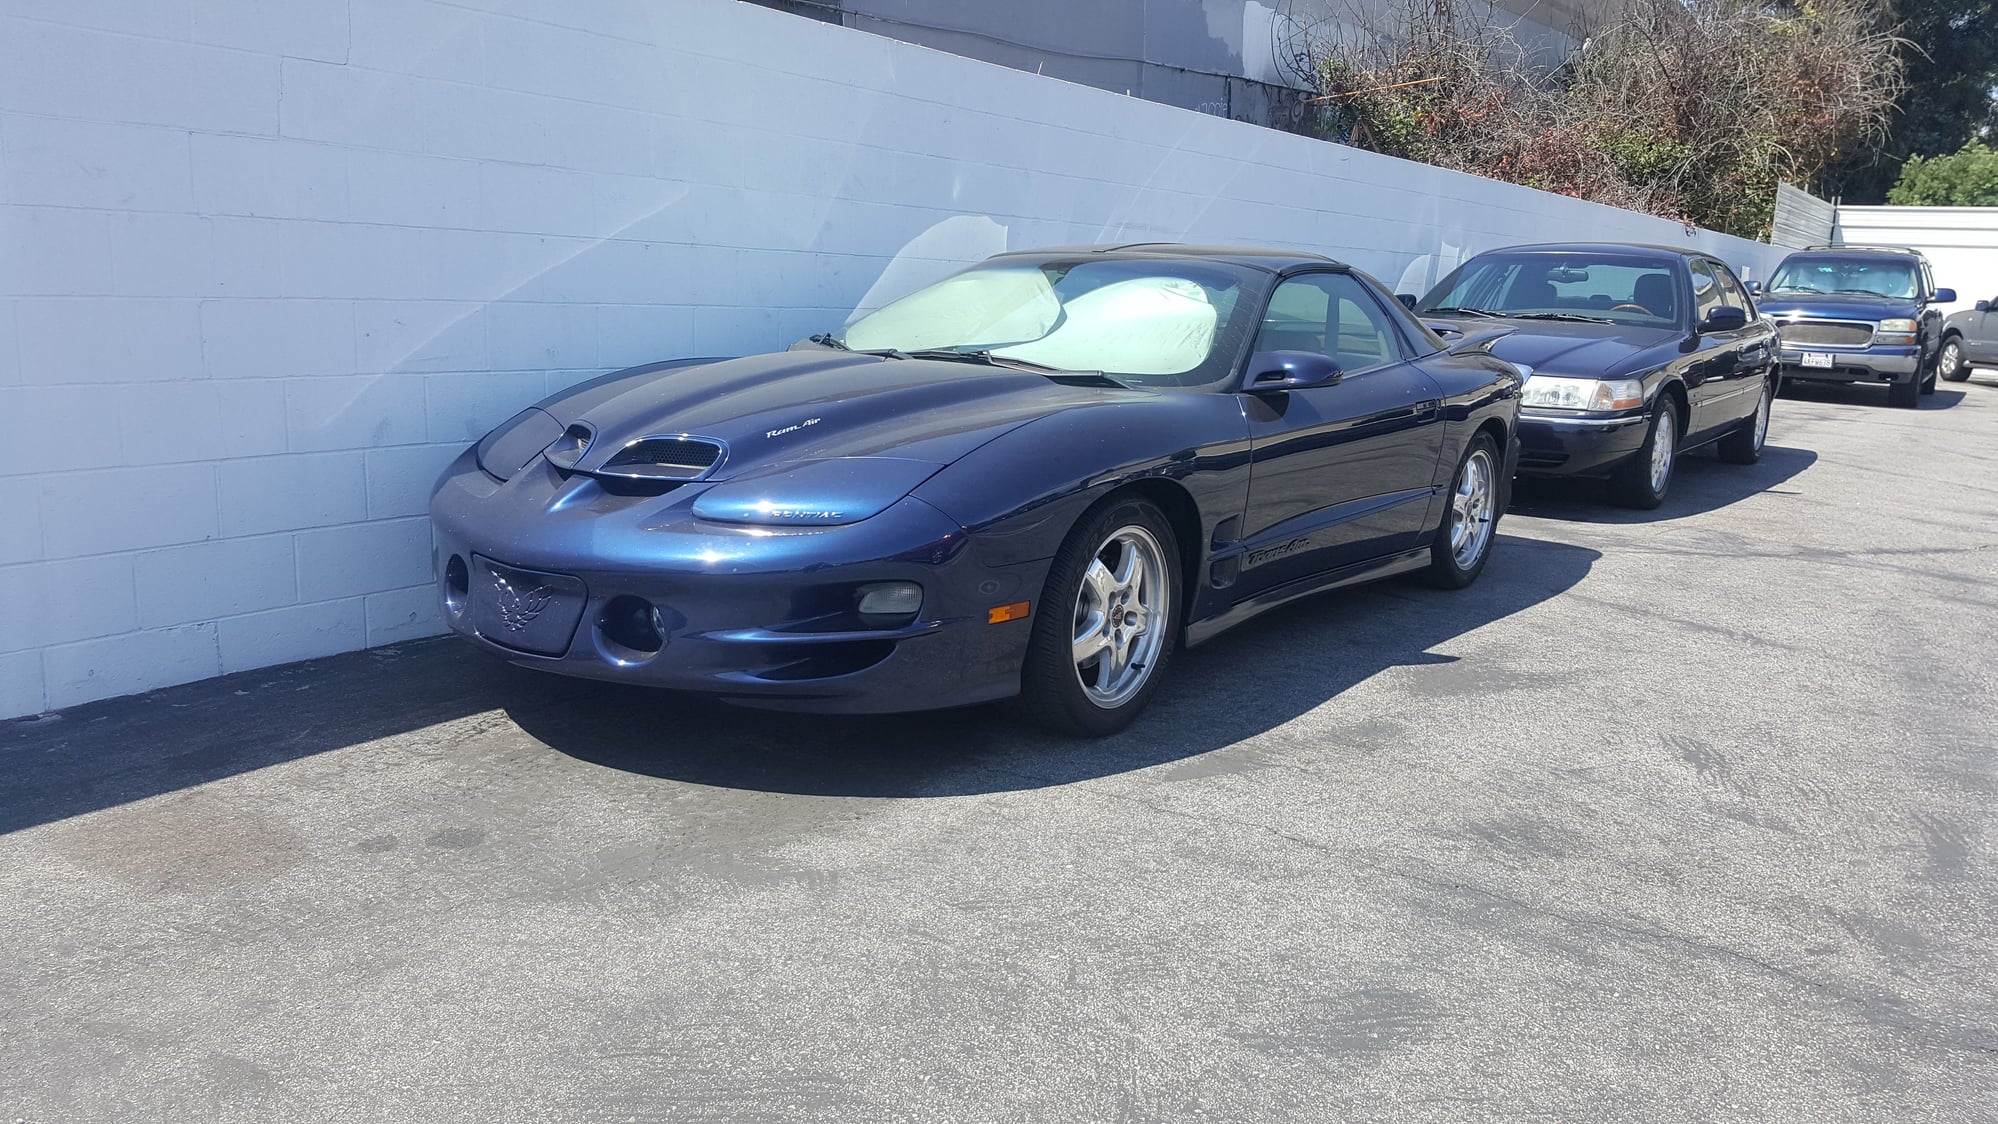 2002 Pontiac Firebird - 2002 ws- 2nd owner - Used - VIN 2G2FV22GX22162824 - 47,000 Miles - 8 cyl - 2WD - Manual - Coupe - Blue - Los Angeles, CA 90028, United States